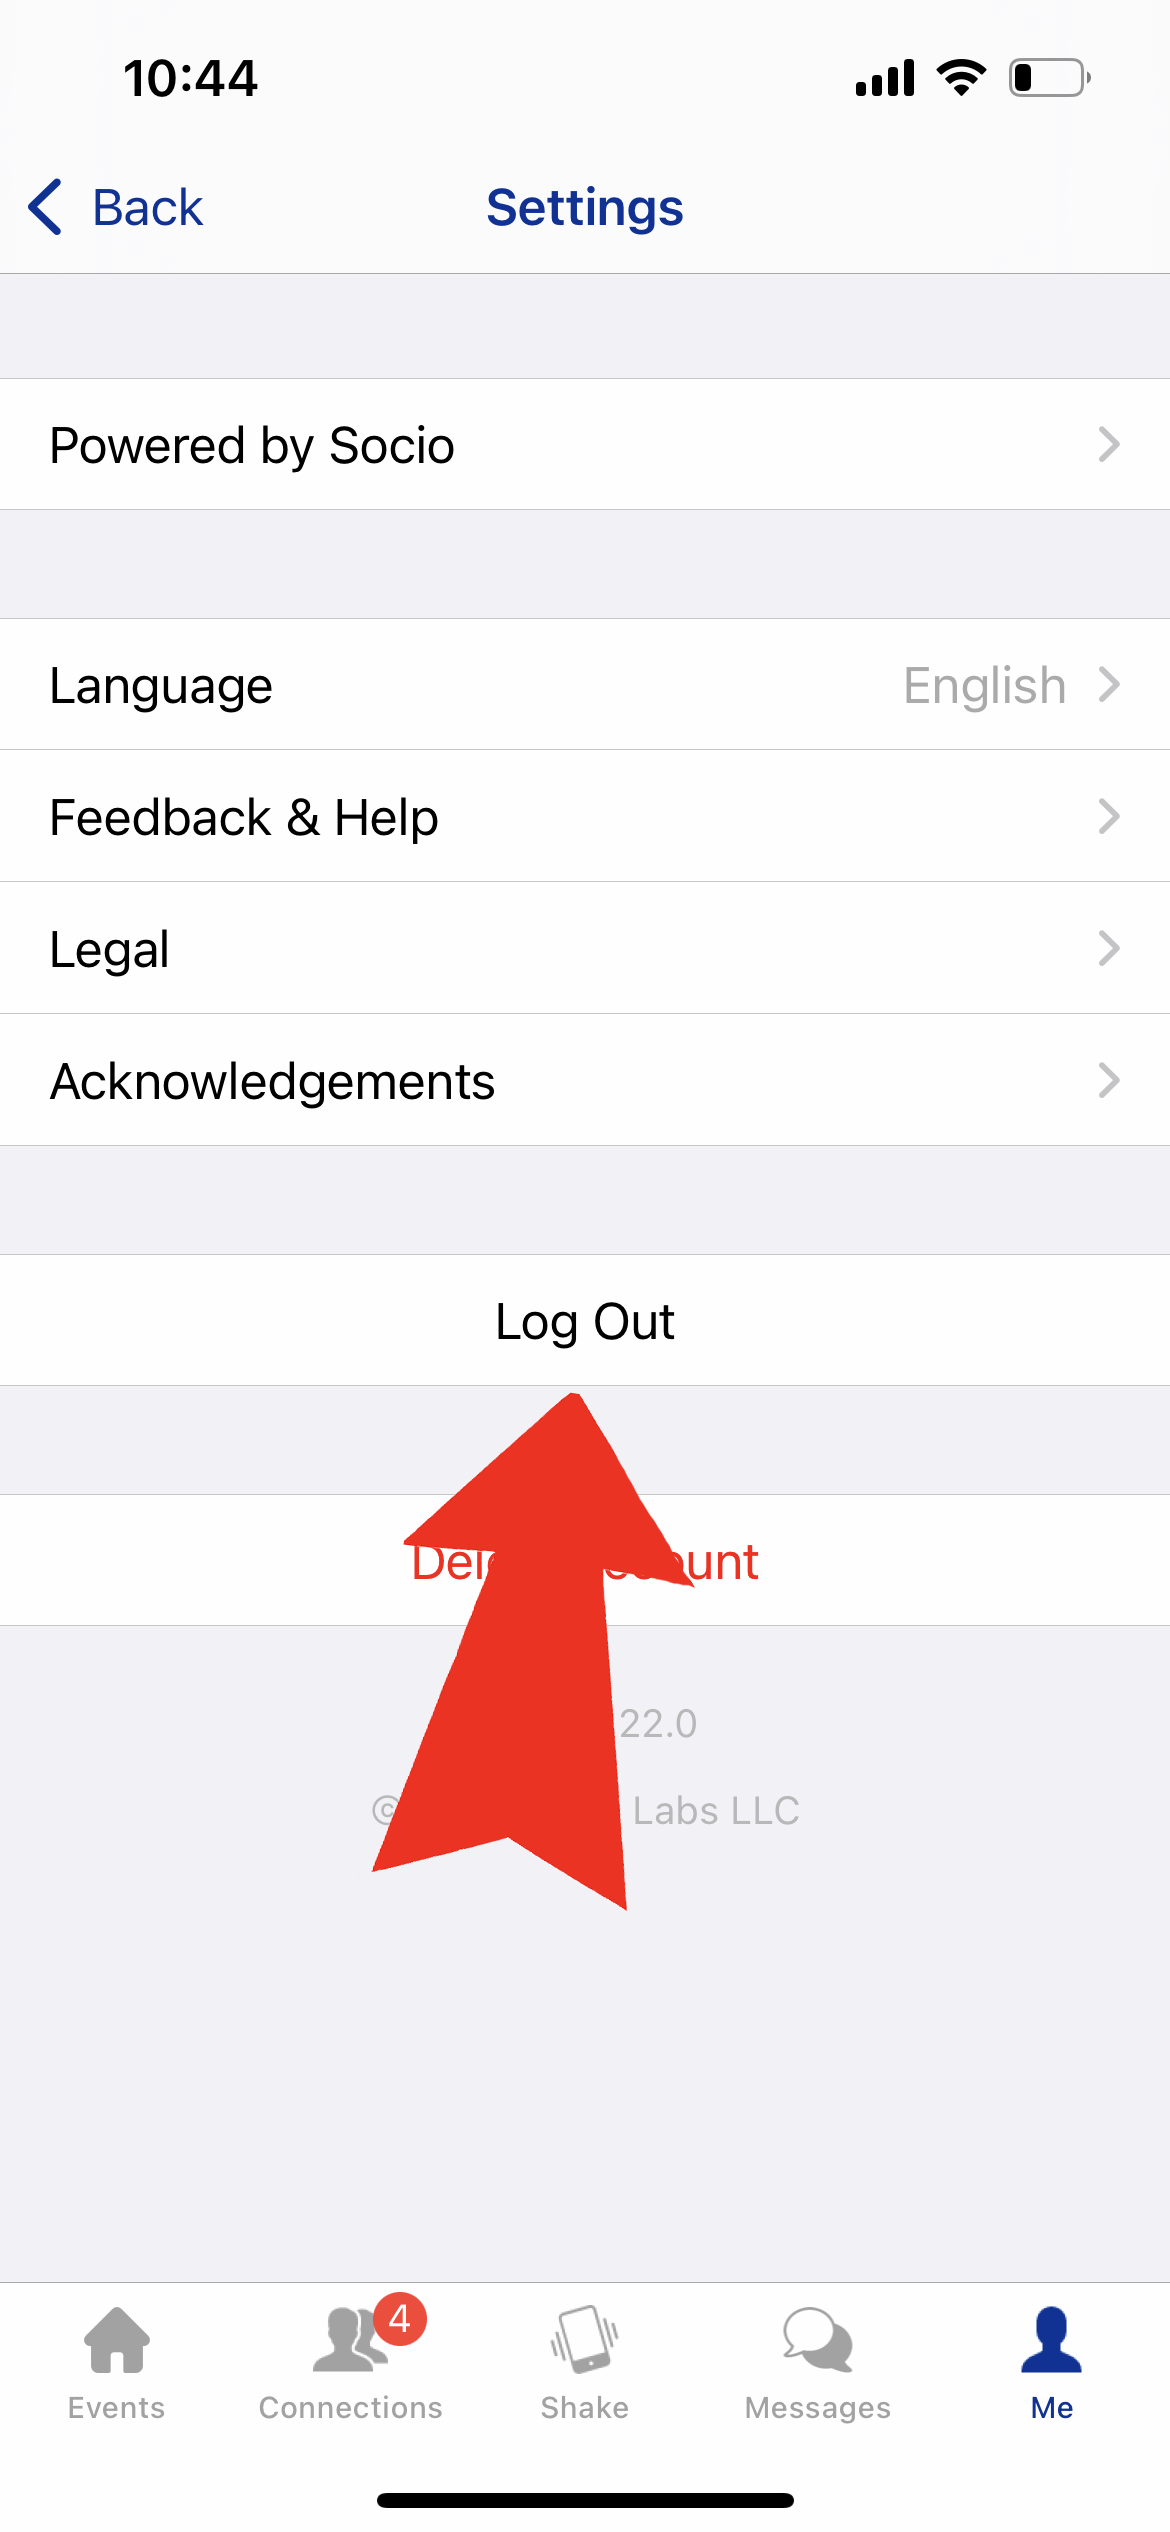 Screenshot of the Settings screen of the app with an arrow pointing to the Log Out button